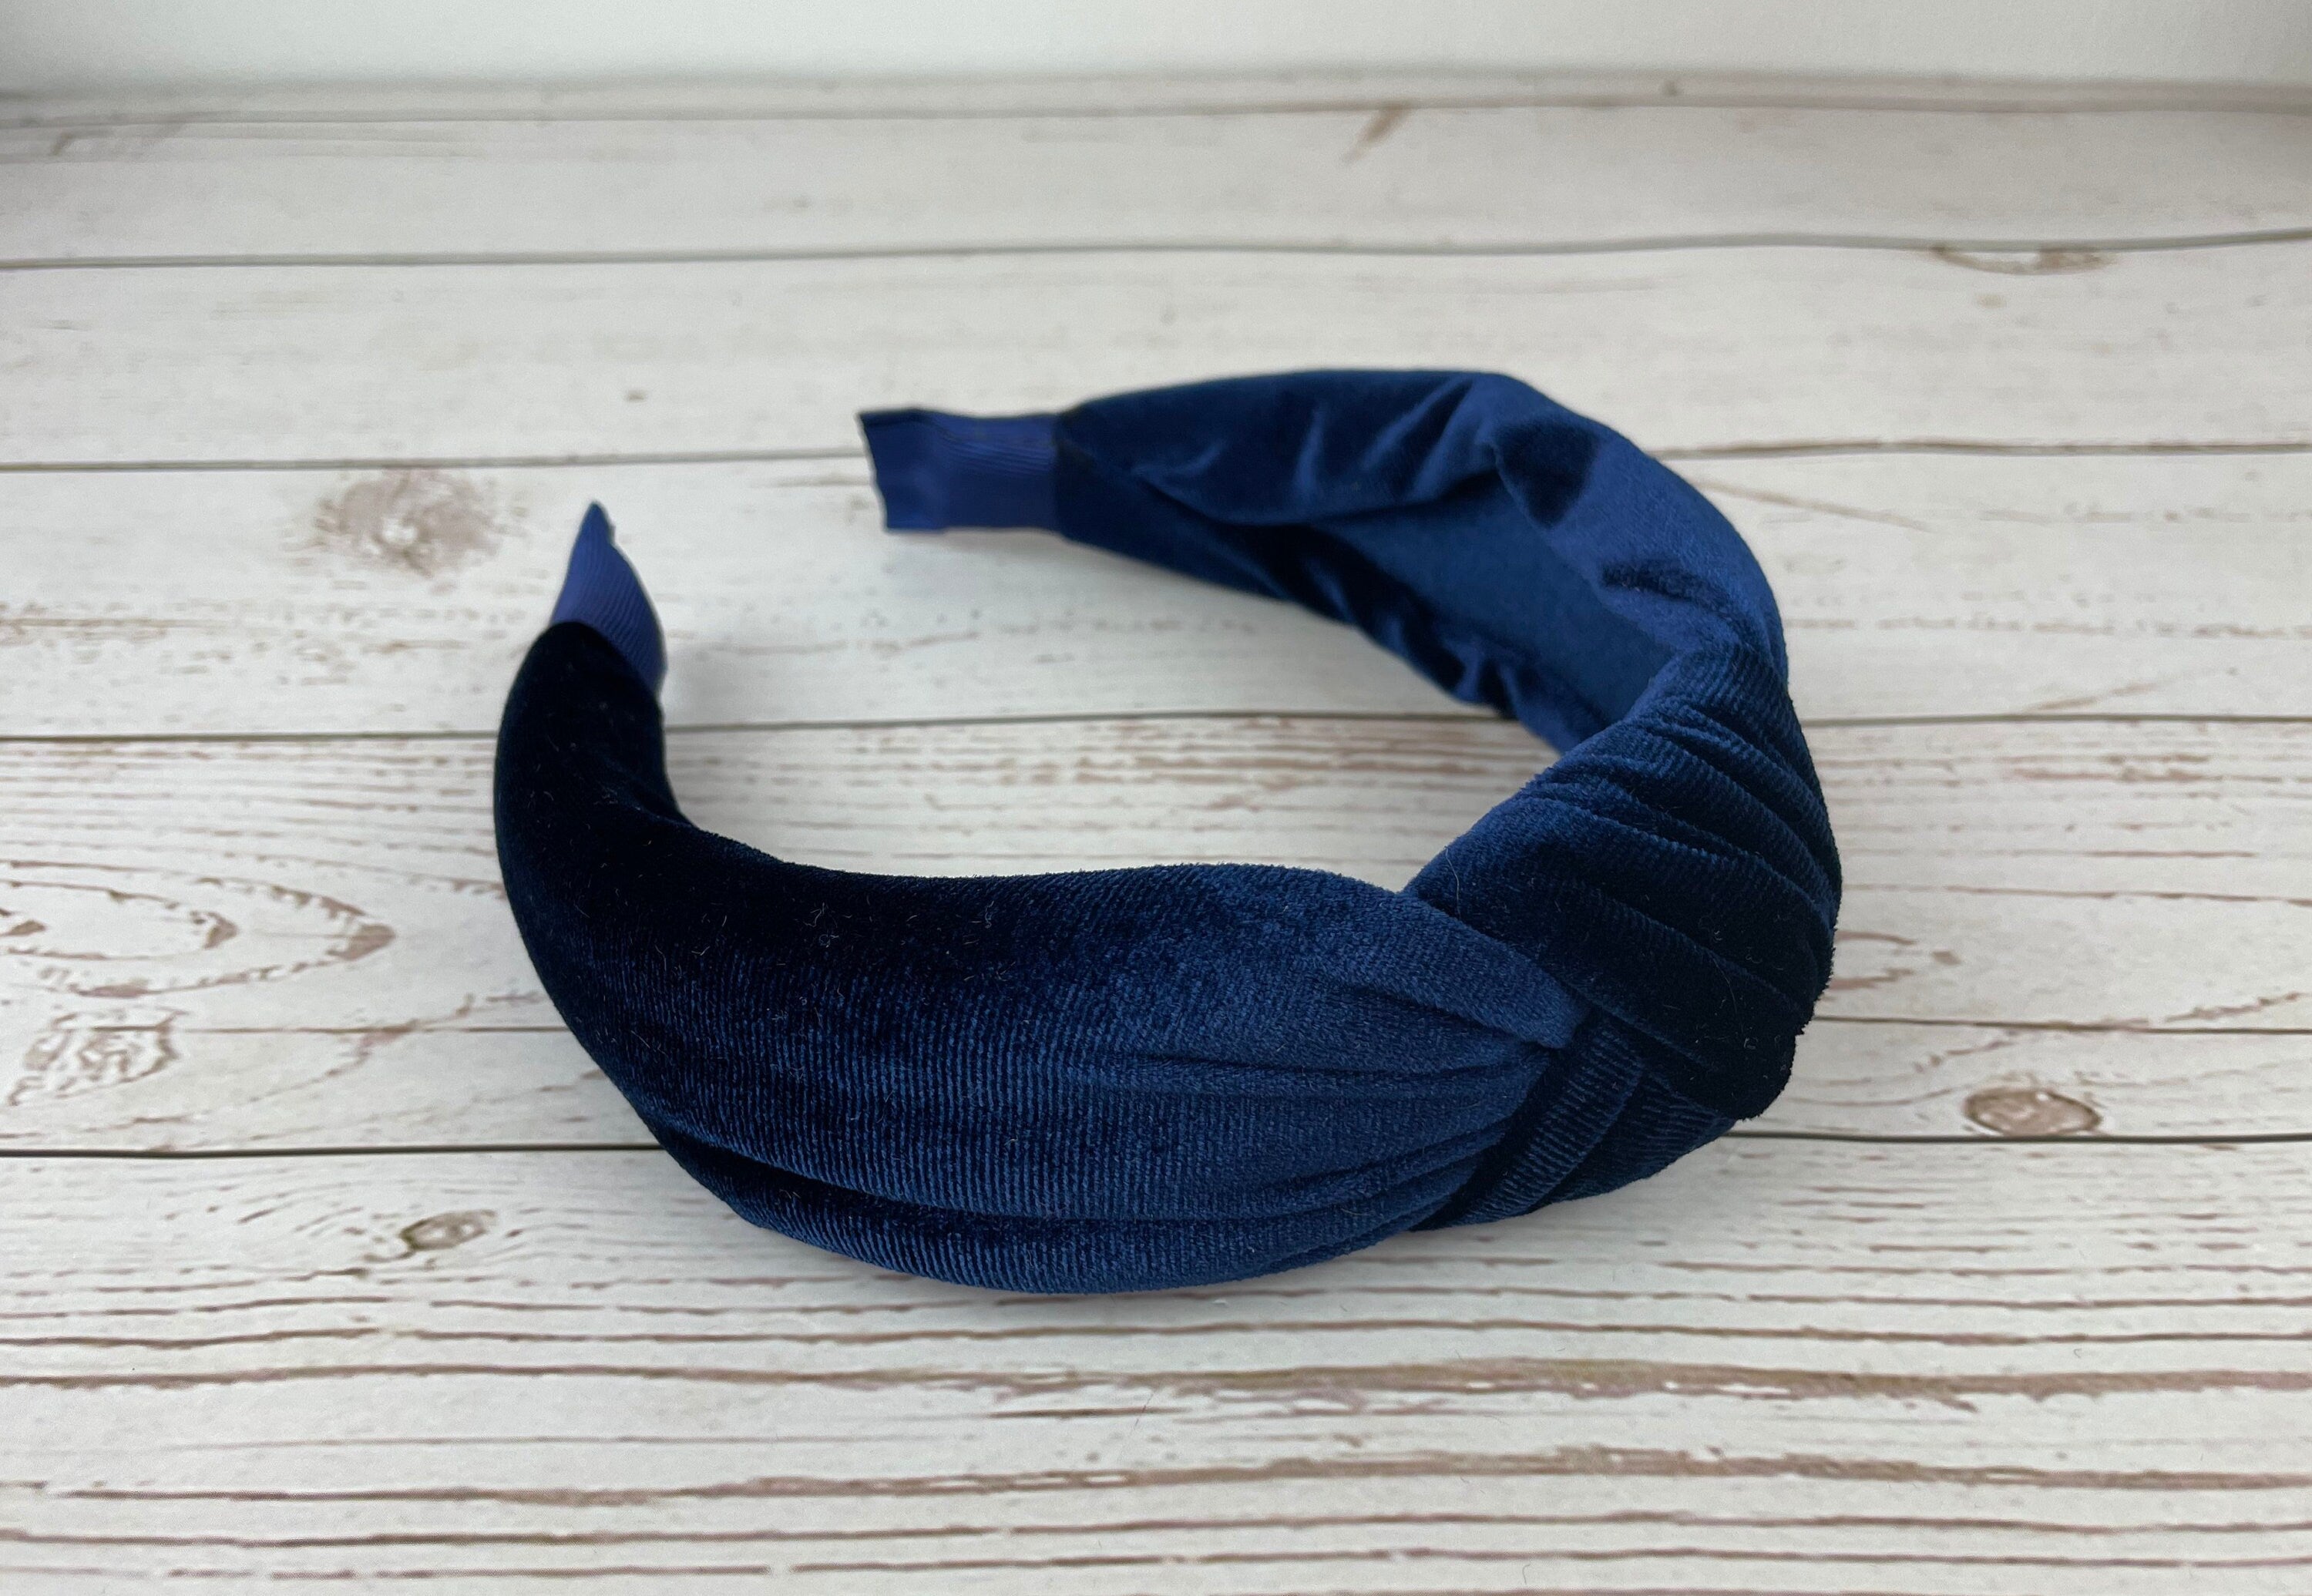 Make a statement with this timeless Dark Blue Women Classic Headband, crafted from high-quality materials for ultimate comfort and style.